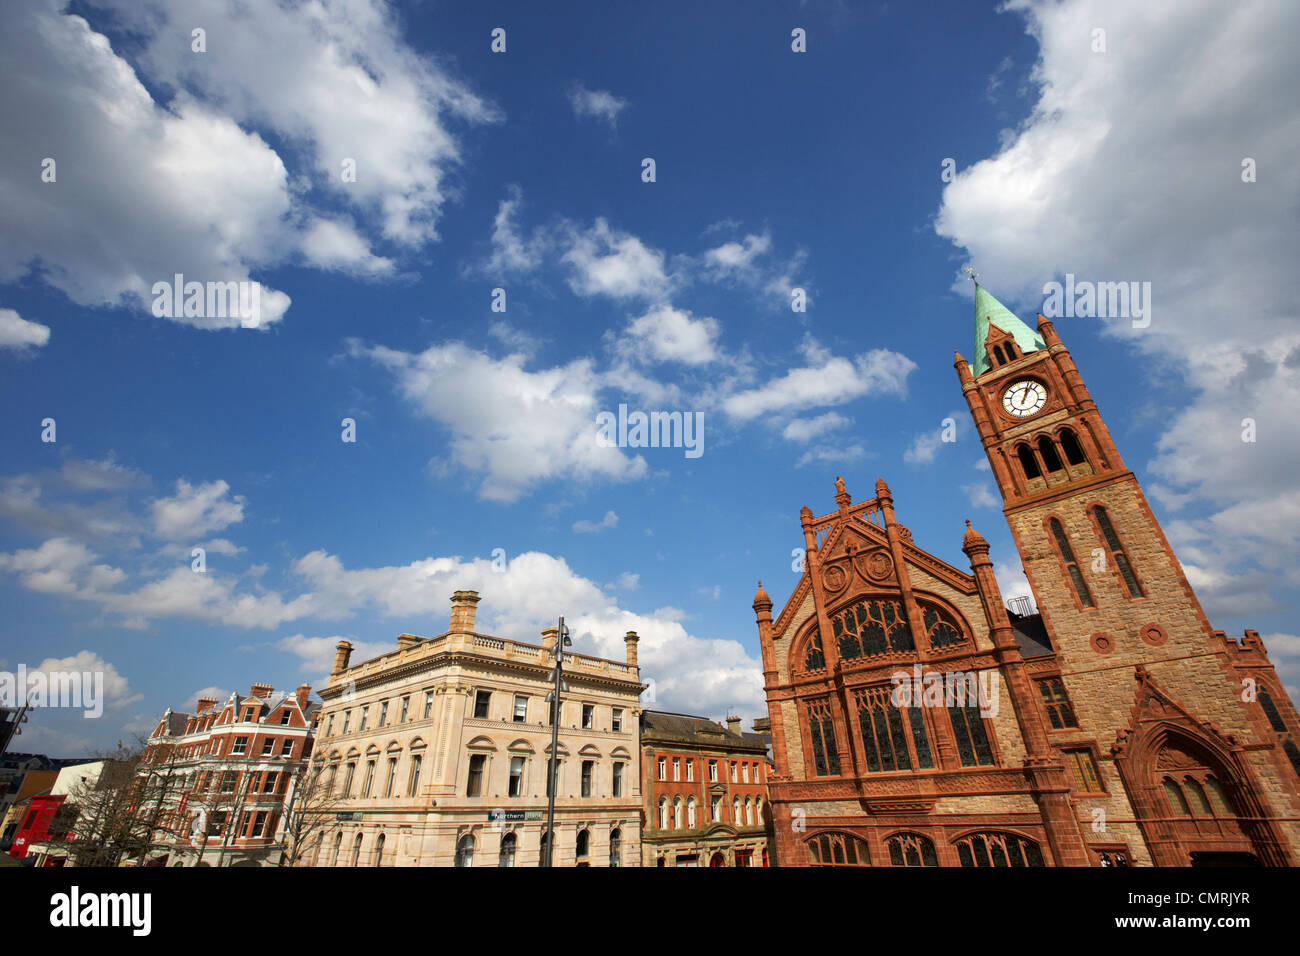 The northern bank building and the Guildhall Derry city county londonderry northern ireland uk. Stock Photo